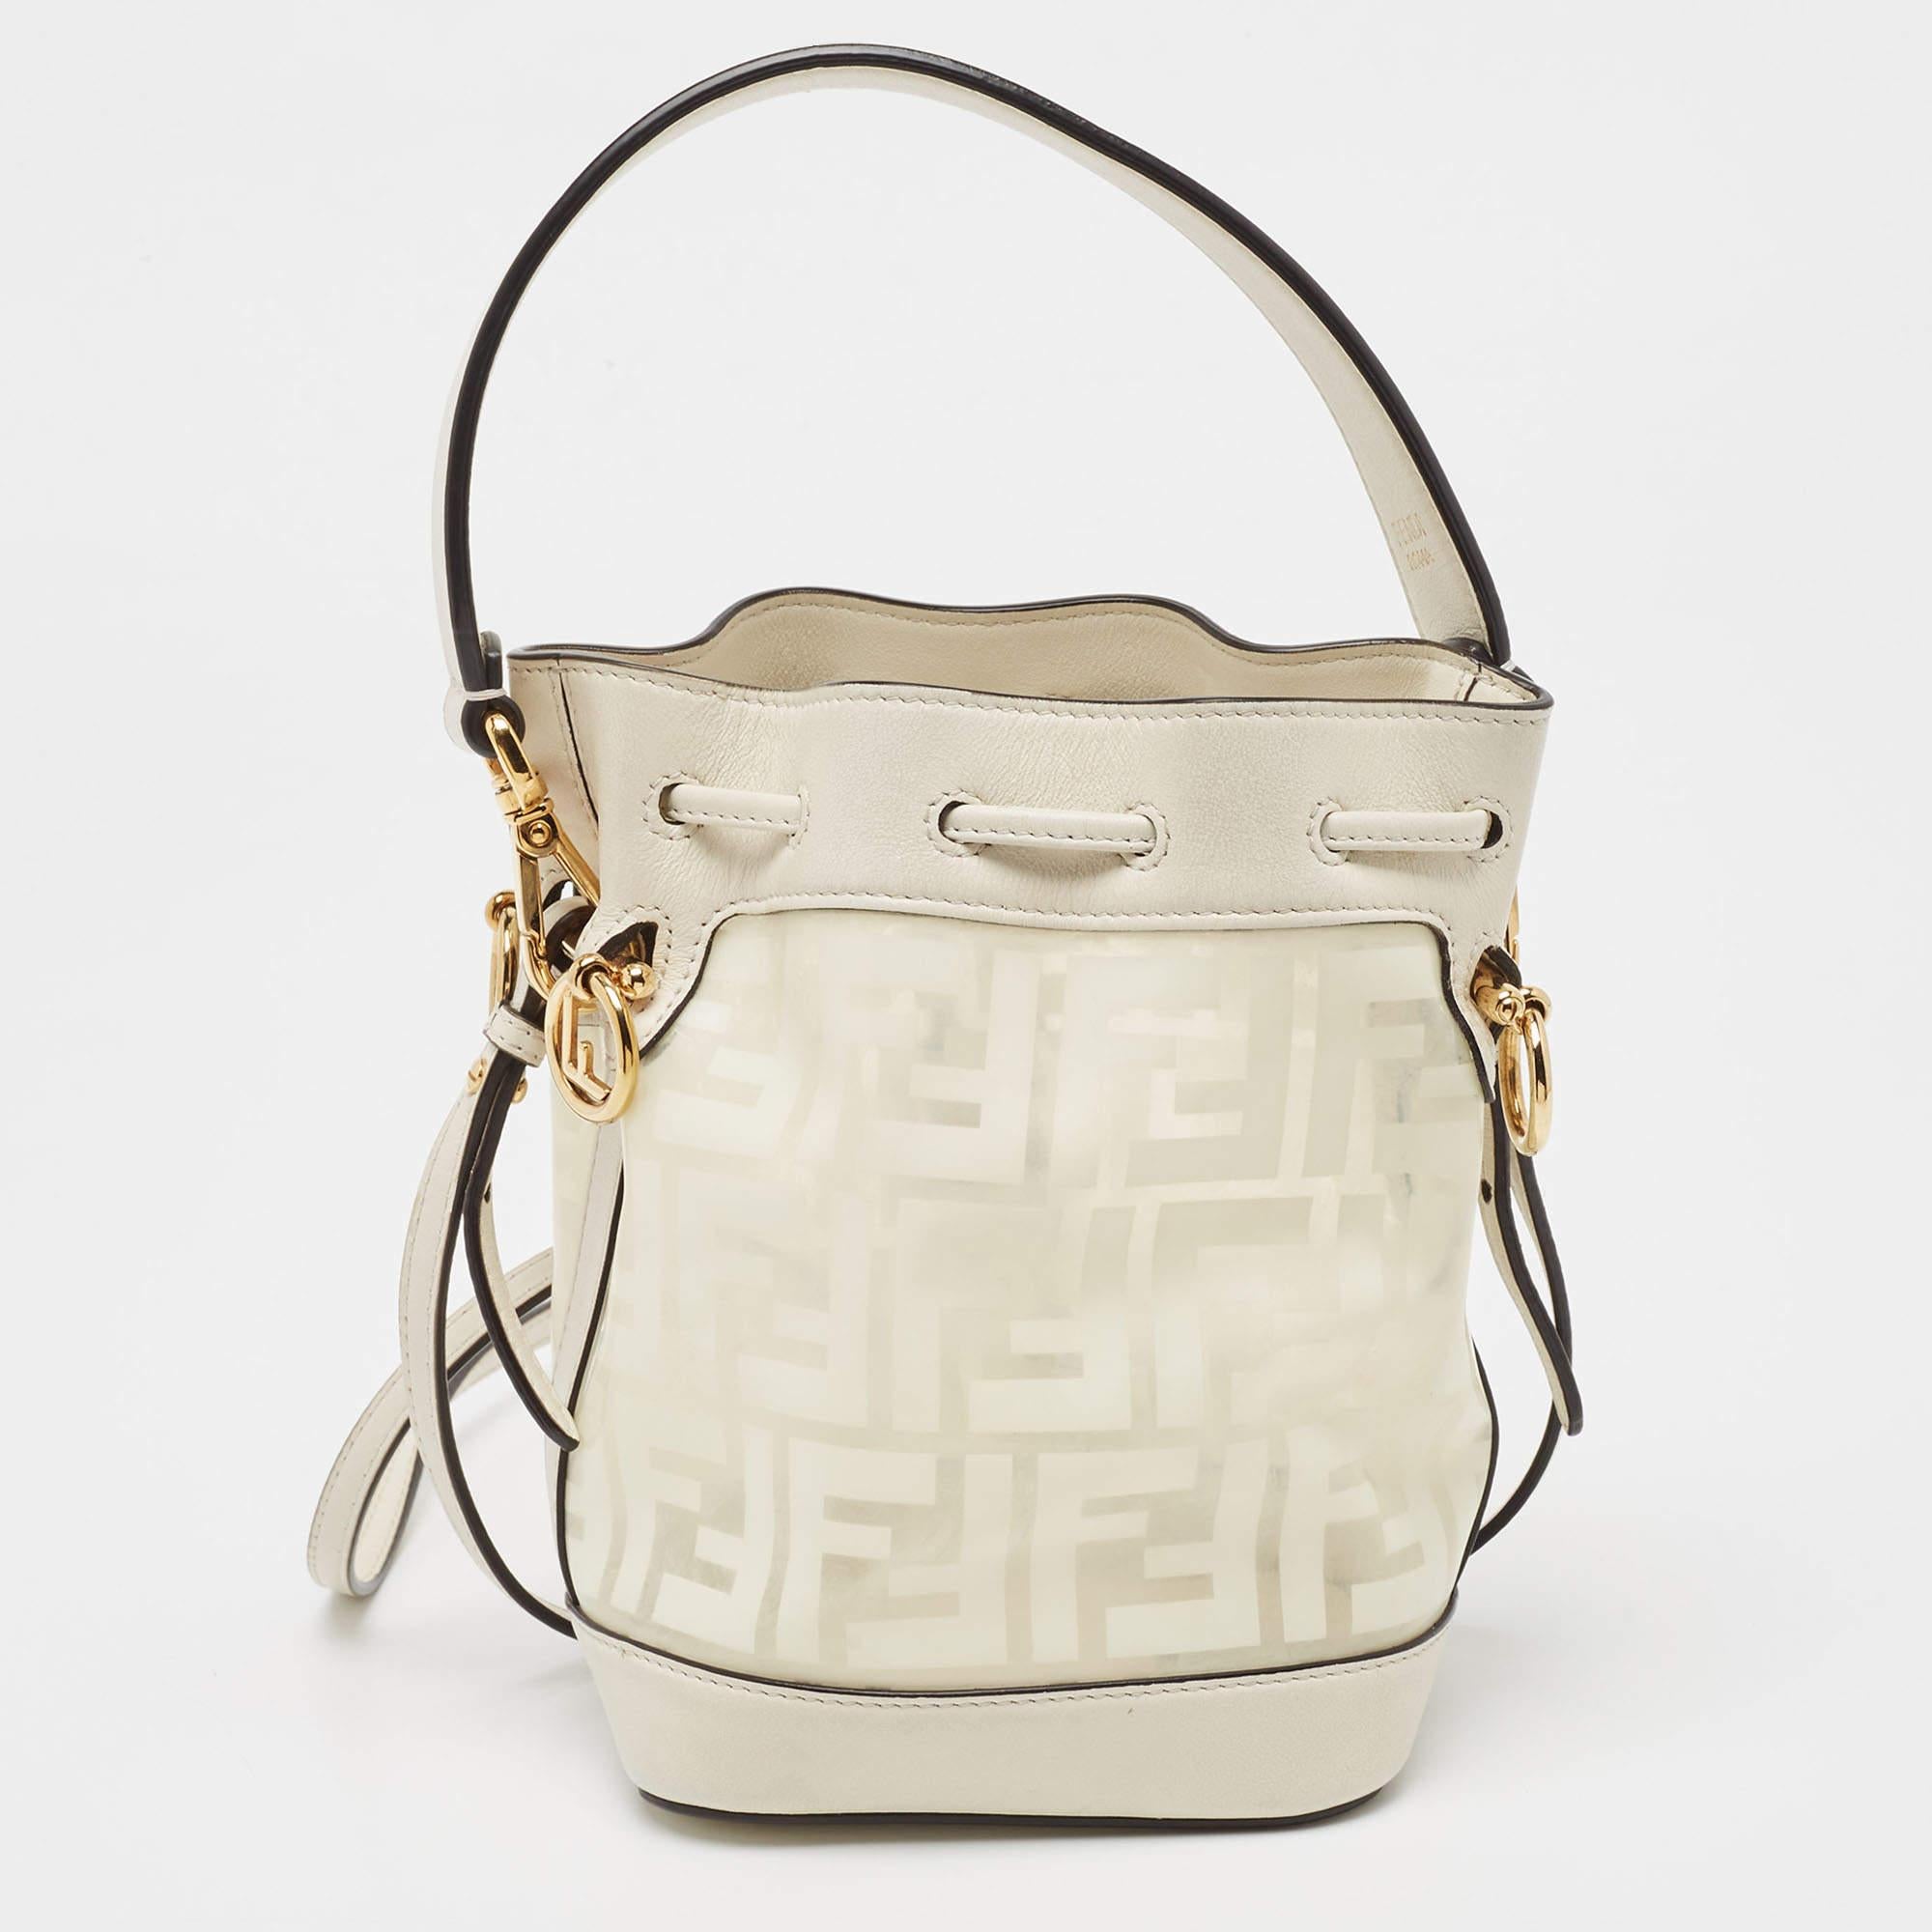 This wonderful Fendi design is made from FF leather and enhanced with gold-tone hardware. The bag has a bucket shape with a drawstring closure that secures the well-sized interior. Complete with a top handle and a shoulder strap, it is an apt